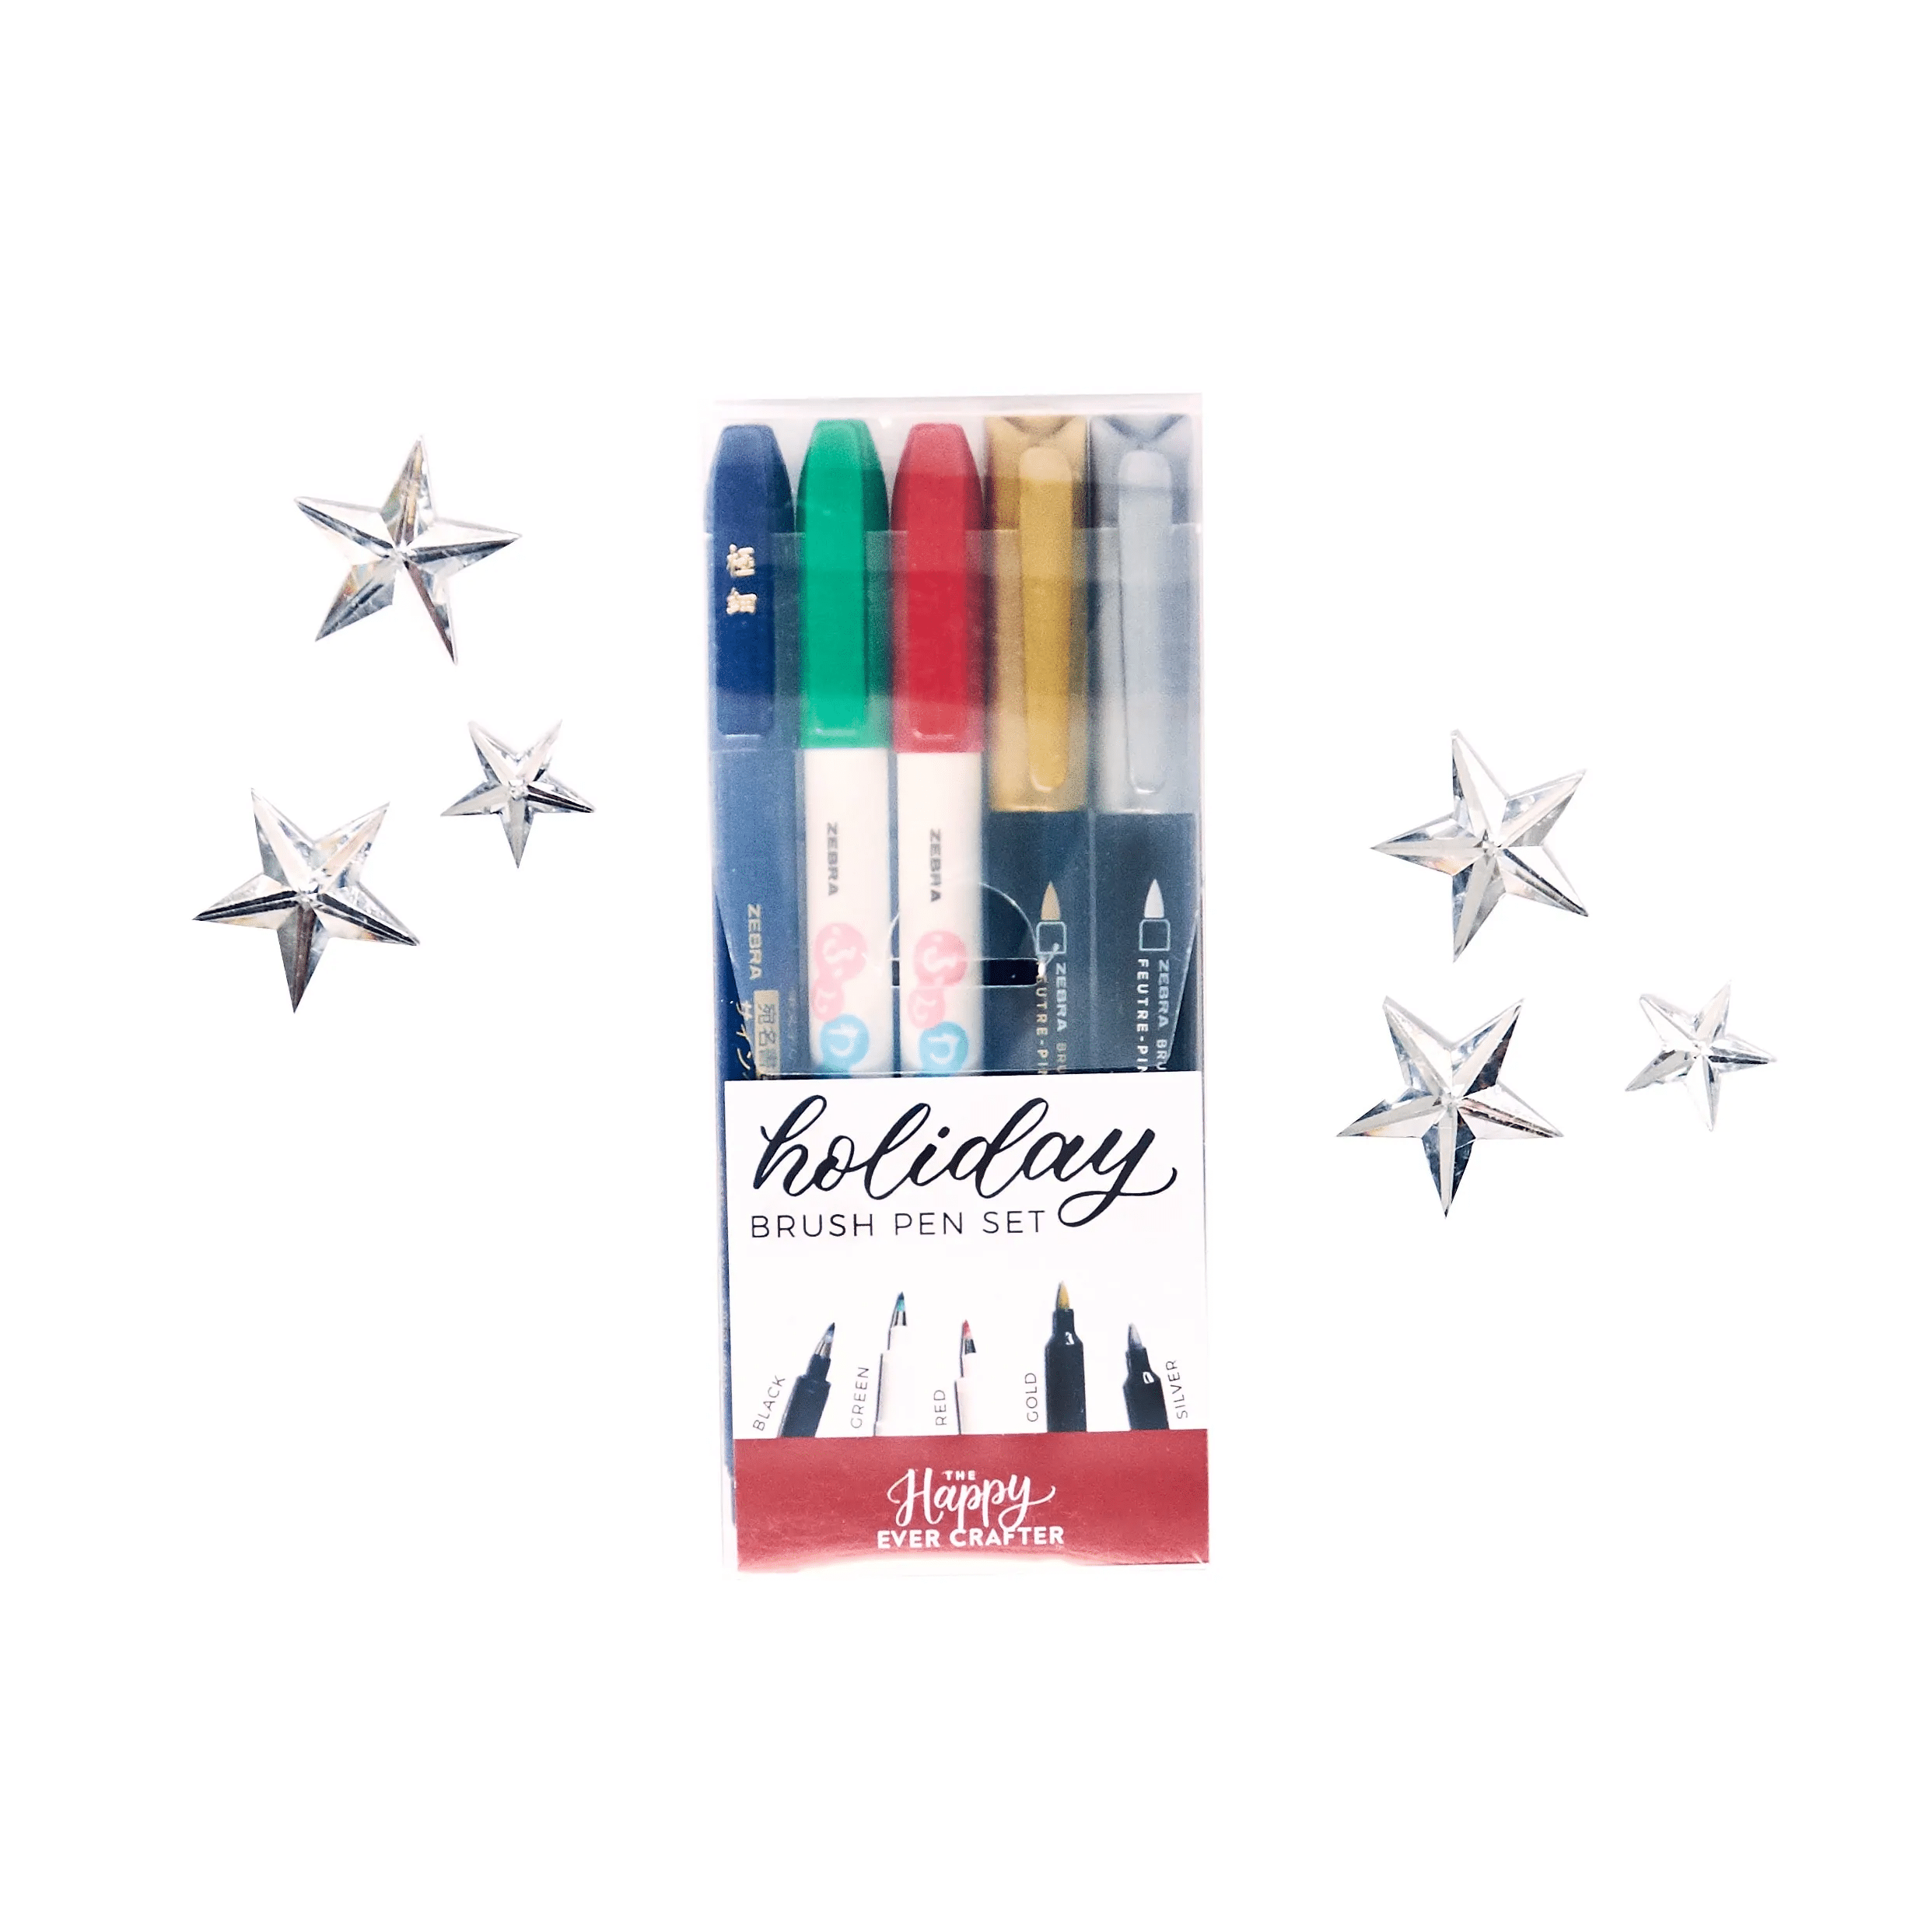 The Happy Ever Crafter Holiday Brush Pen Favorites